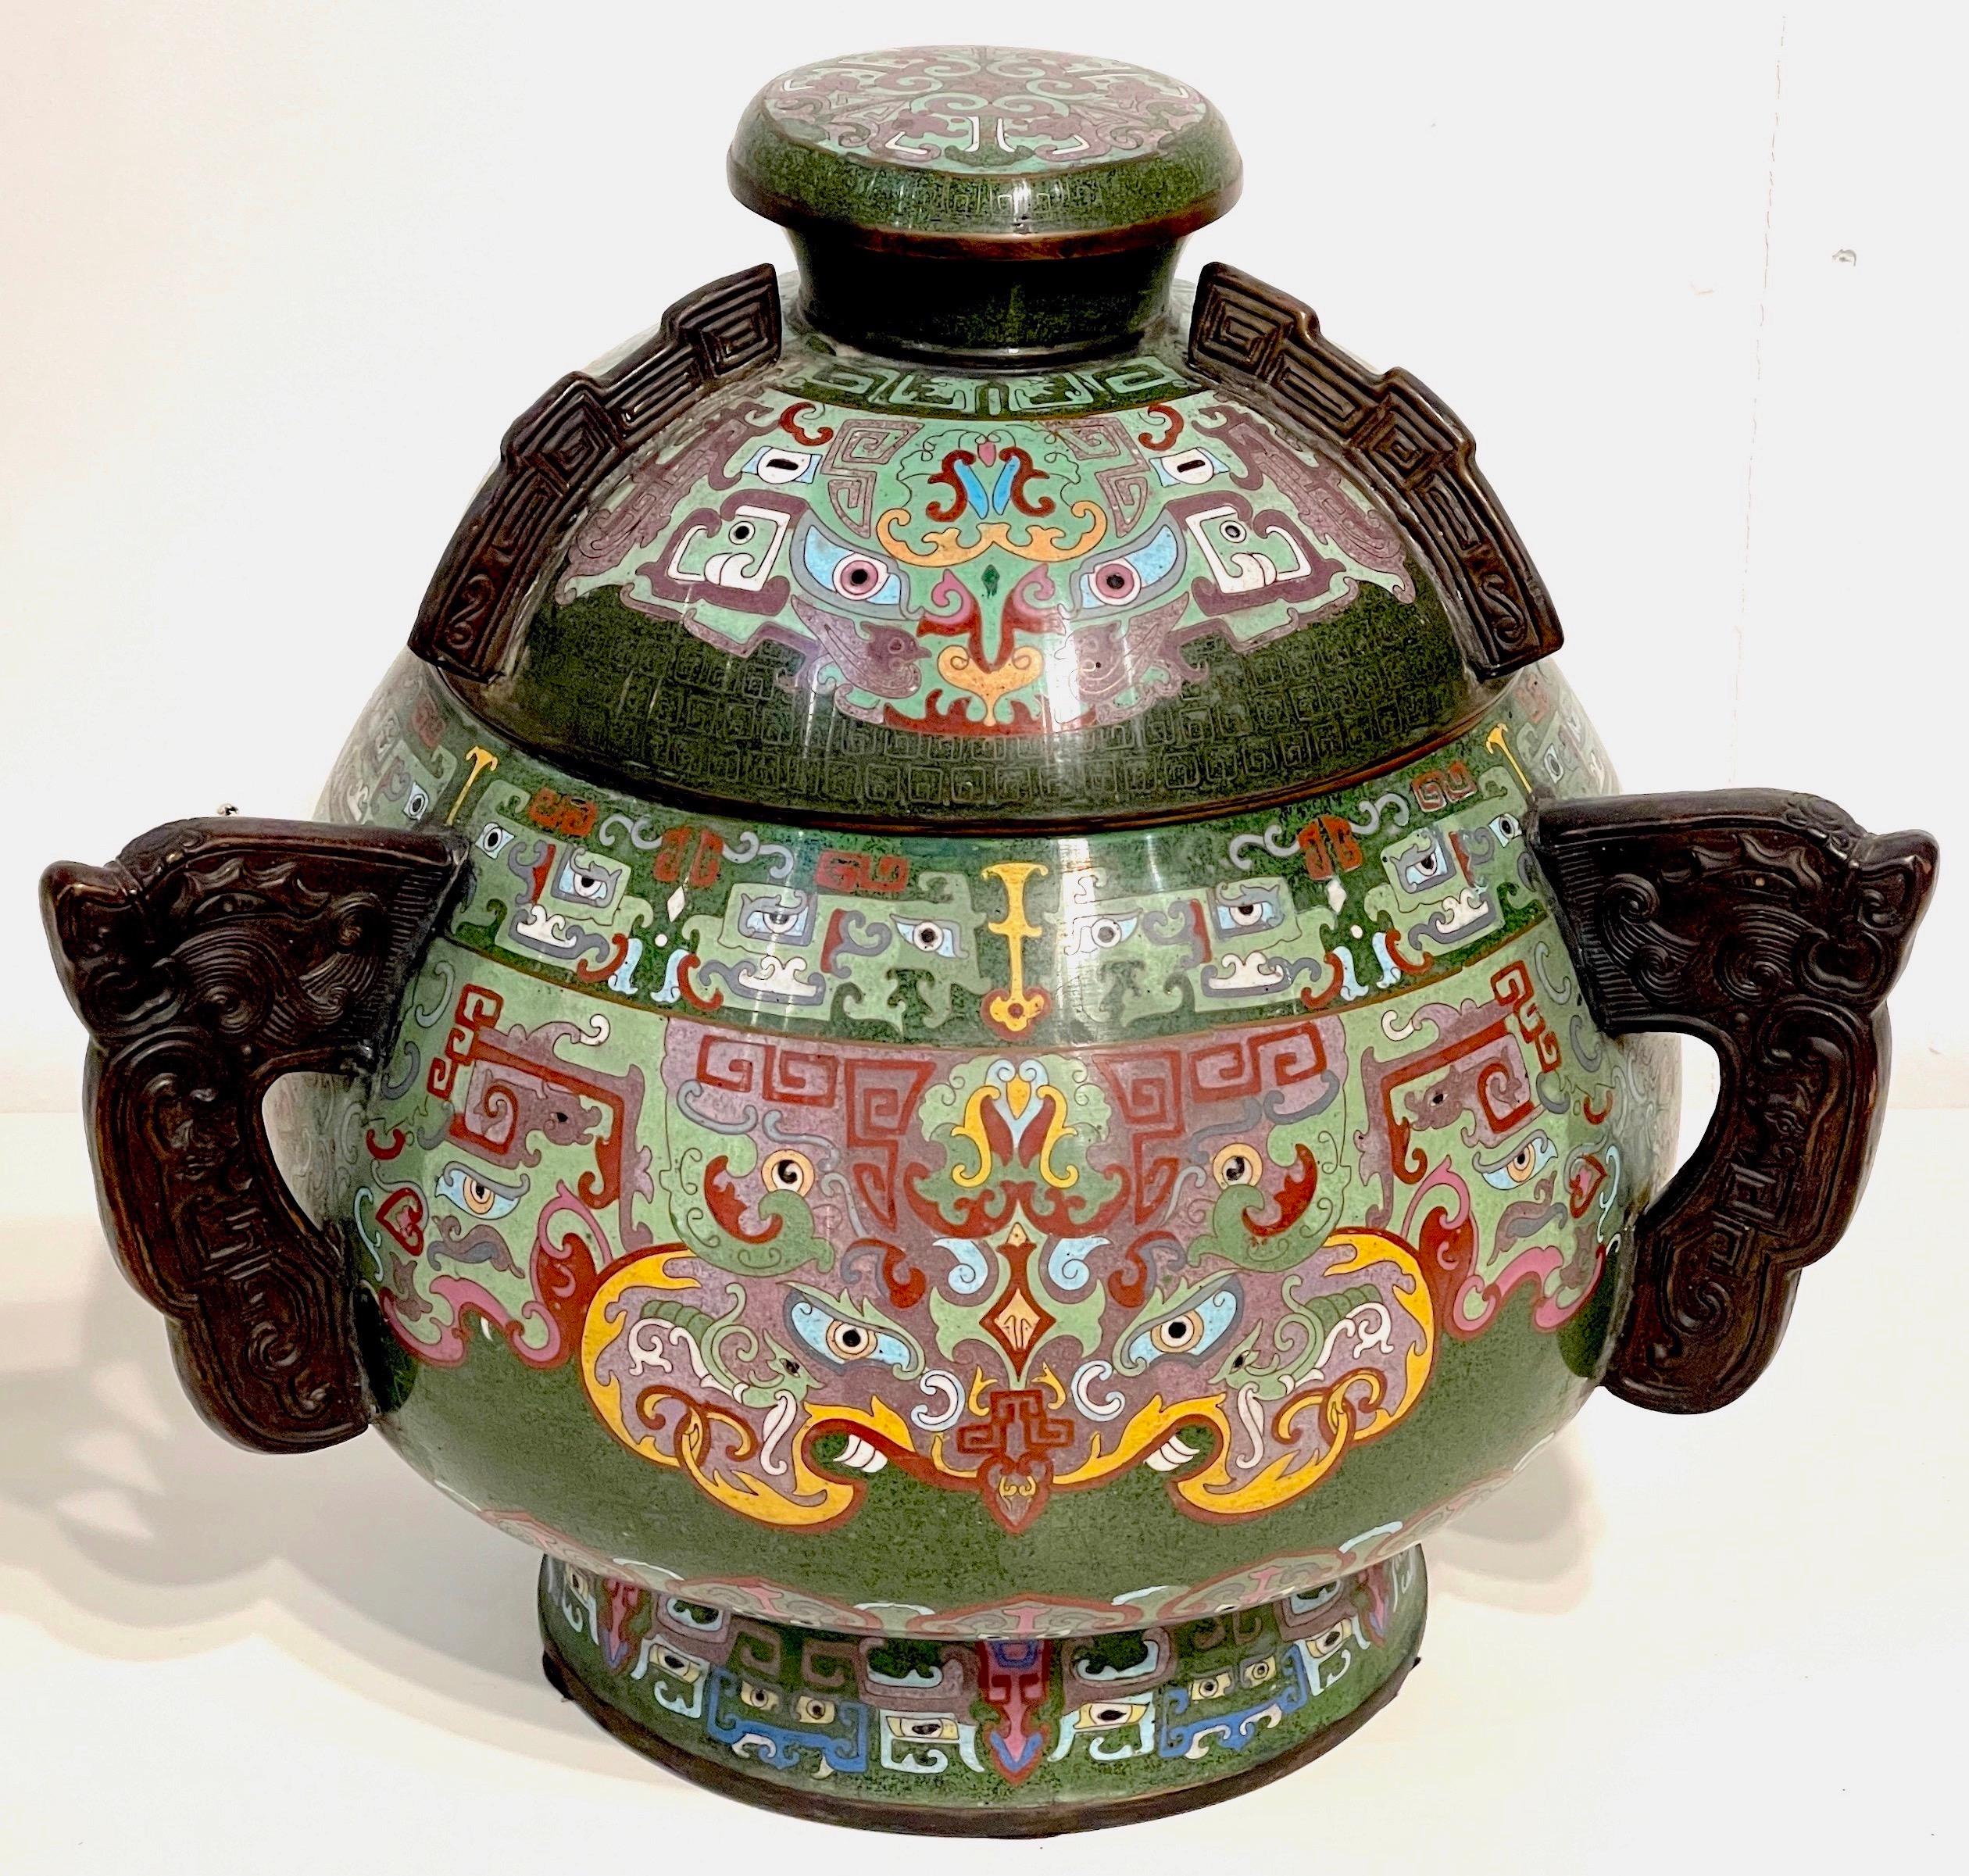 Massive 20th Century Chinese Archaic Style Cloisonné Covered Urn/ Censor 
China, 20th century 
A substantial example, intricately enameled in the Archaic style, with three cast and patinated bronze archaic handles.
Overall measurements;
17 inches